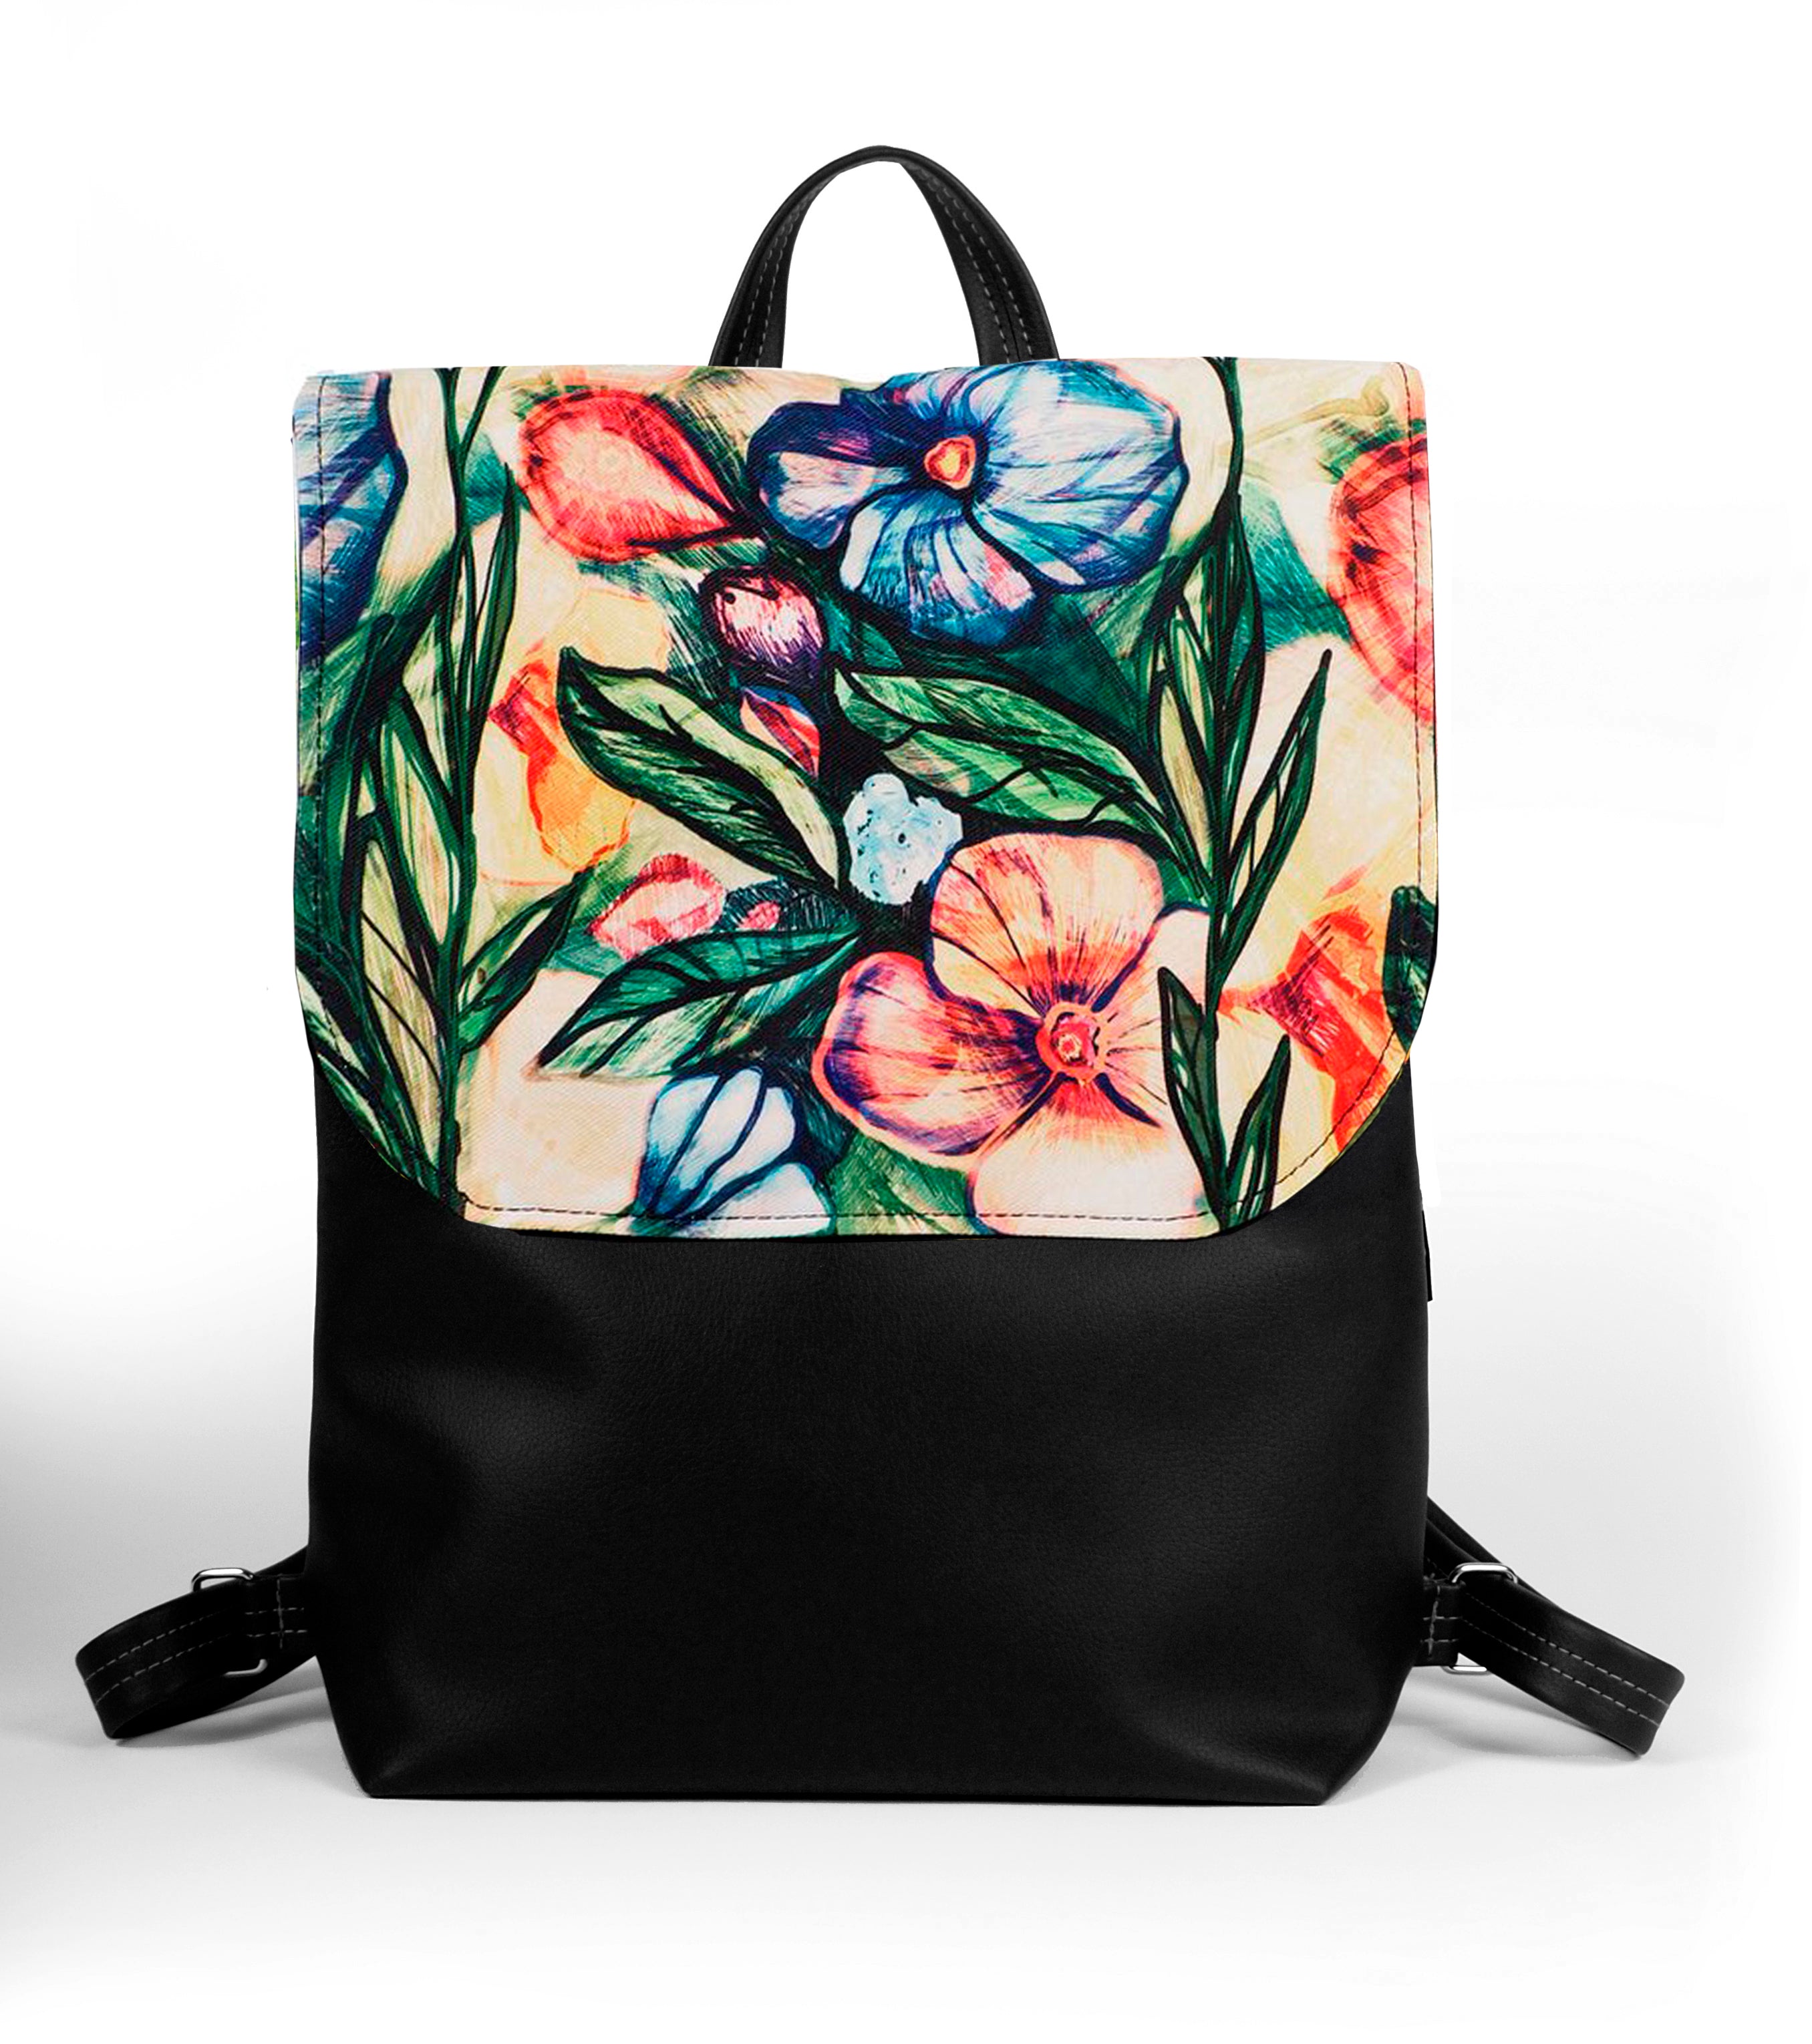 Bardo backpack large - Vintage garden - Premium backpack large from BARDO ART WORKS - Just lvdark green, flowers, forest, gift, handemade, lotos, nature, painted patterns, red, tablet, urban style, vegan leather, woman89.00! Shop now at BARDO ART WORKS